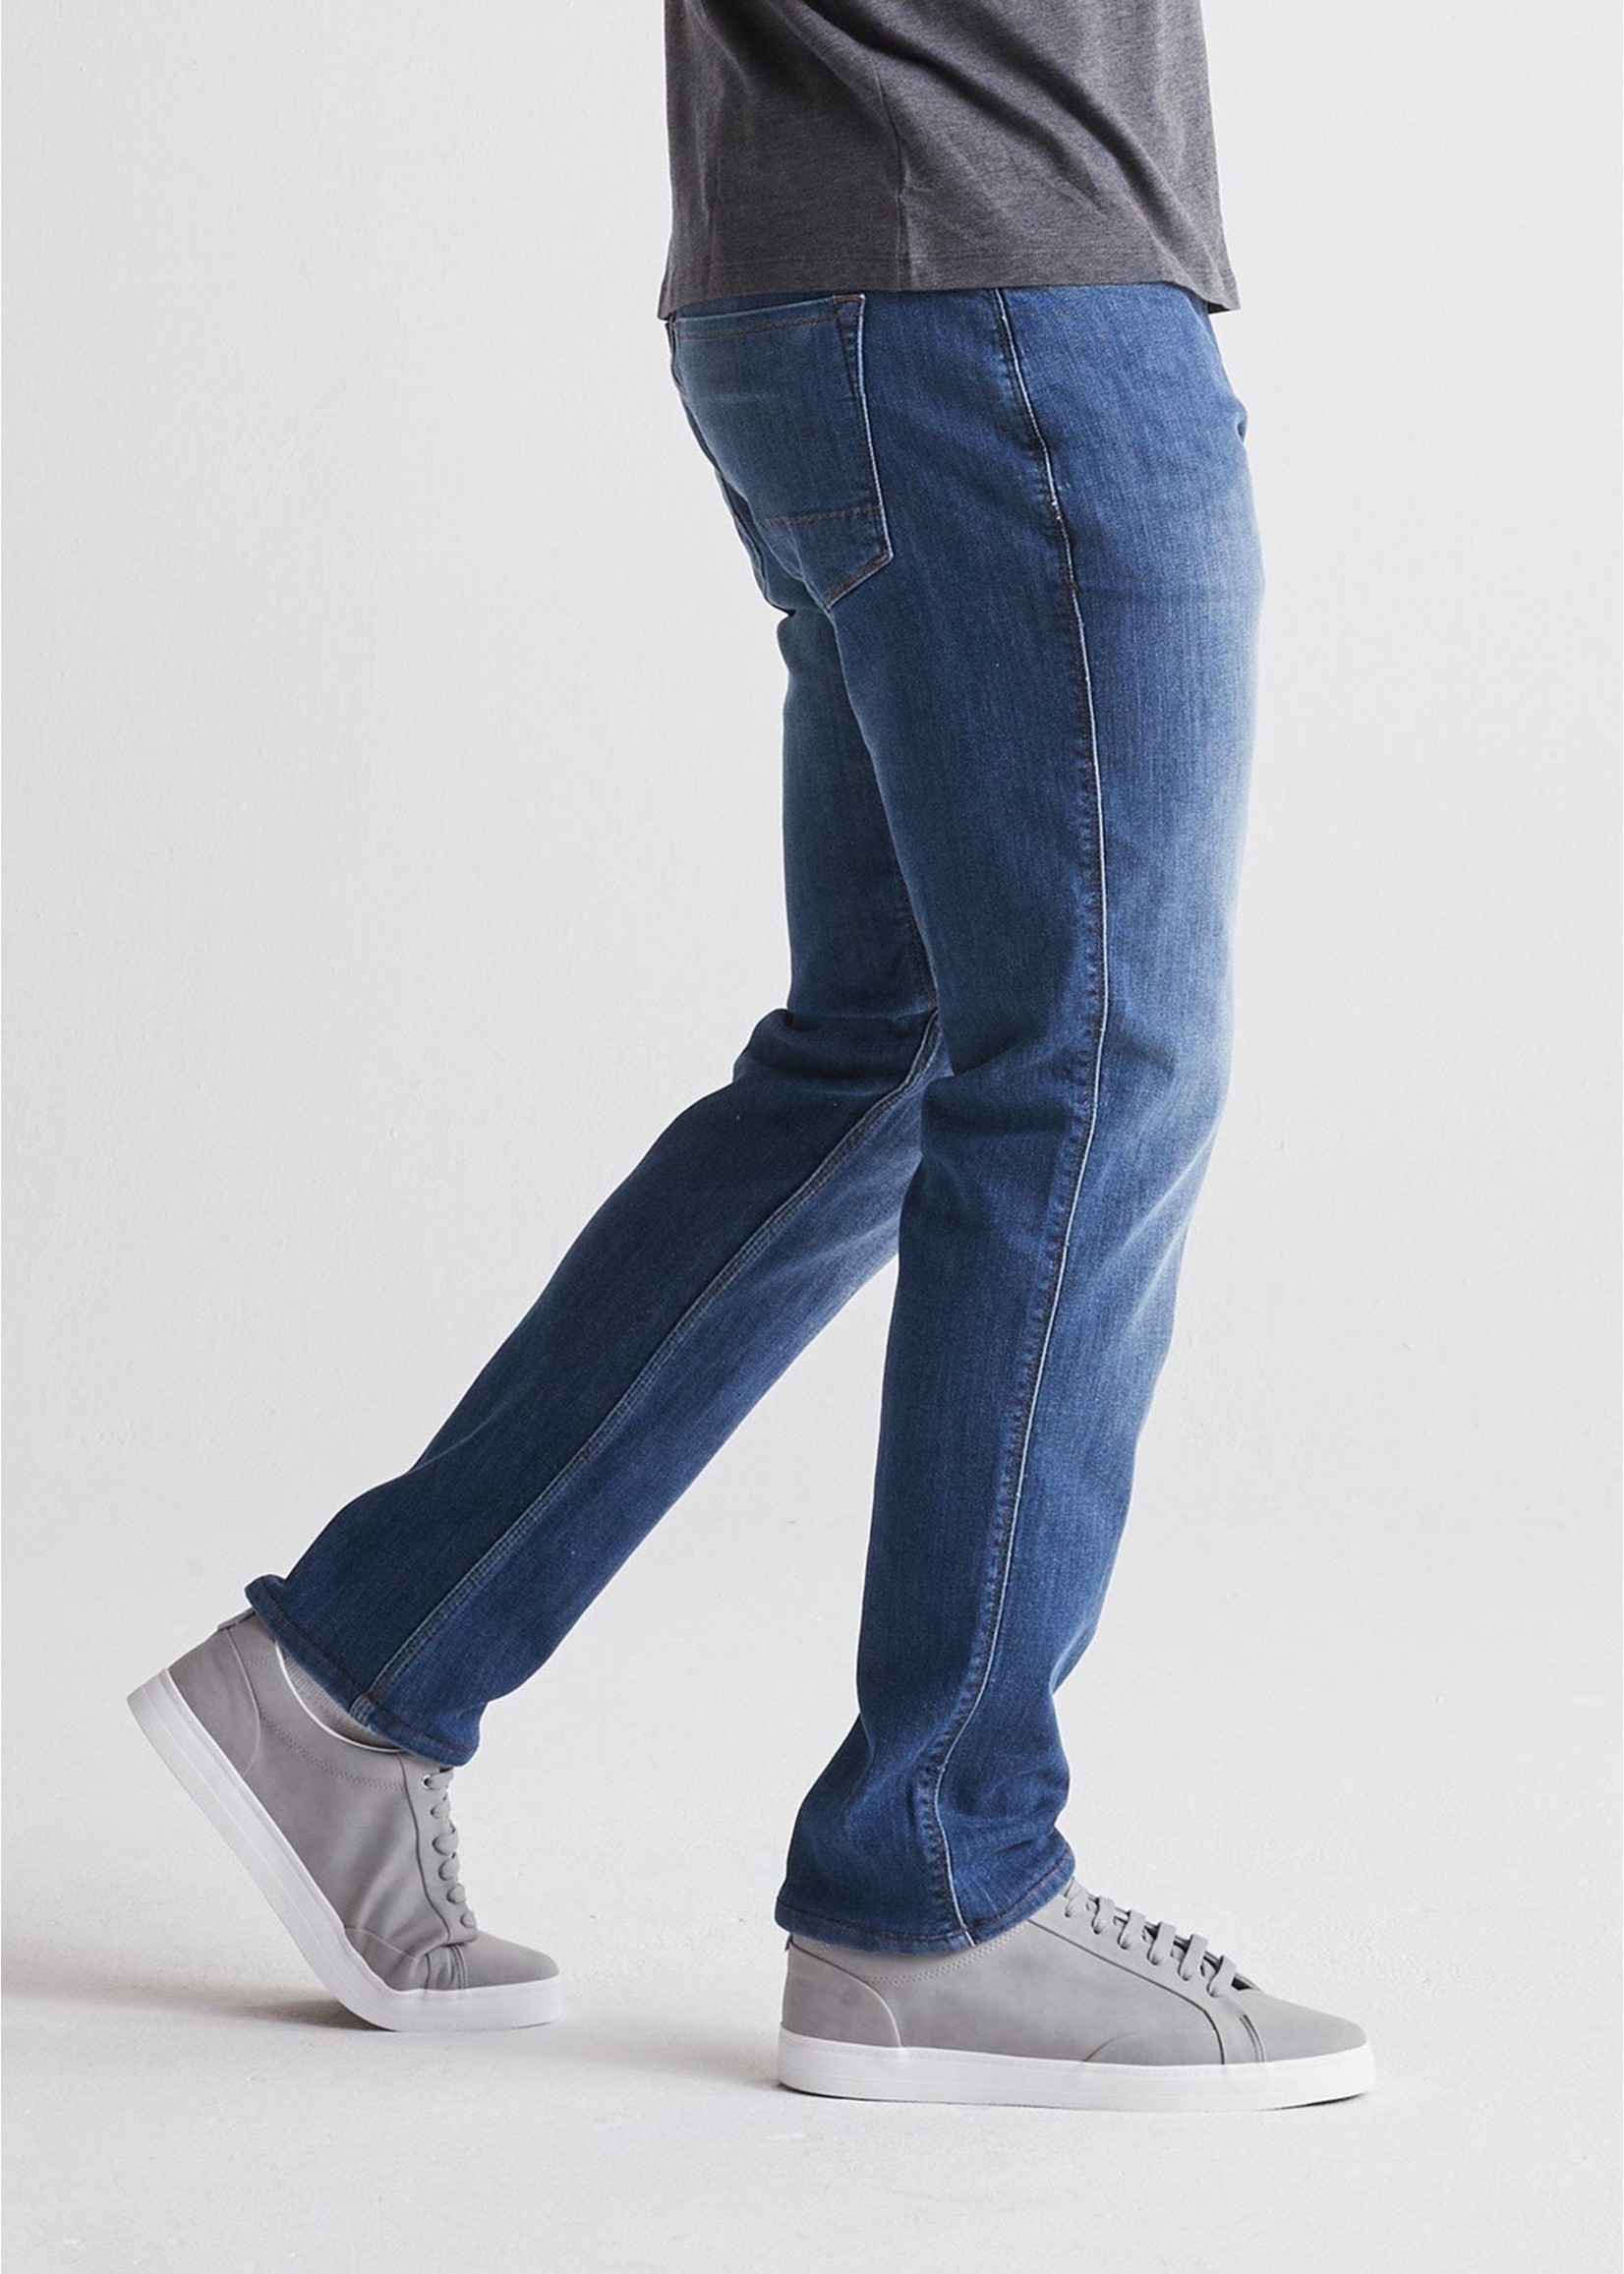 DUER Jeans Performance Denim Relaxed Taper-Homme